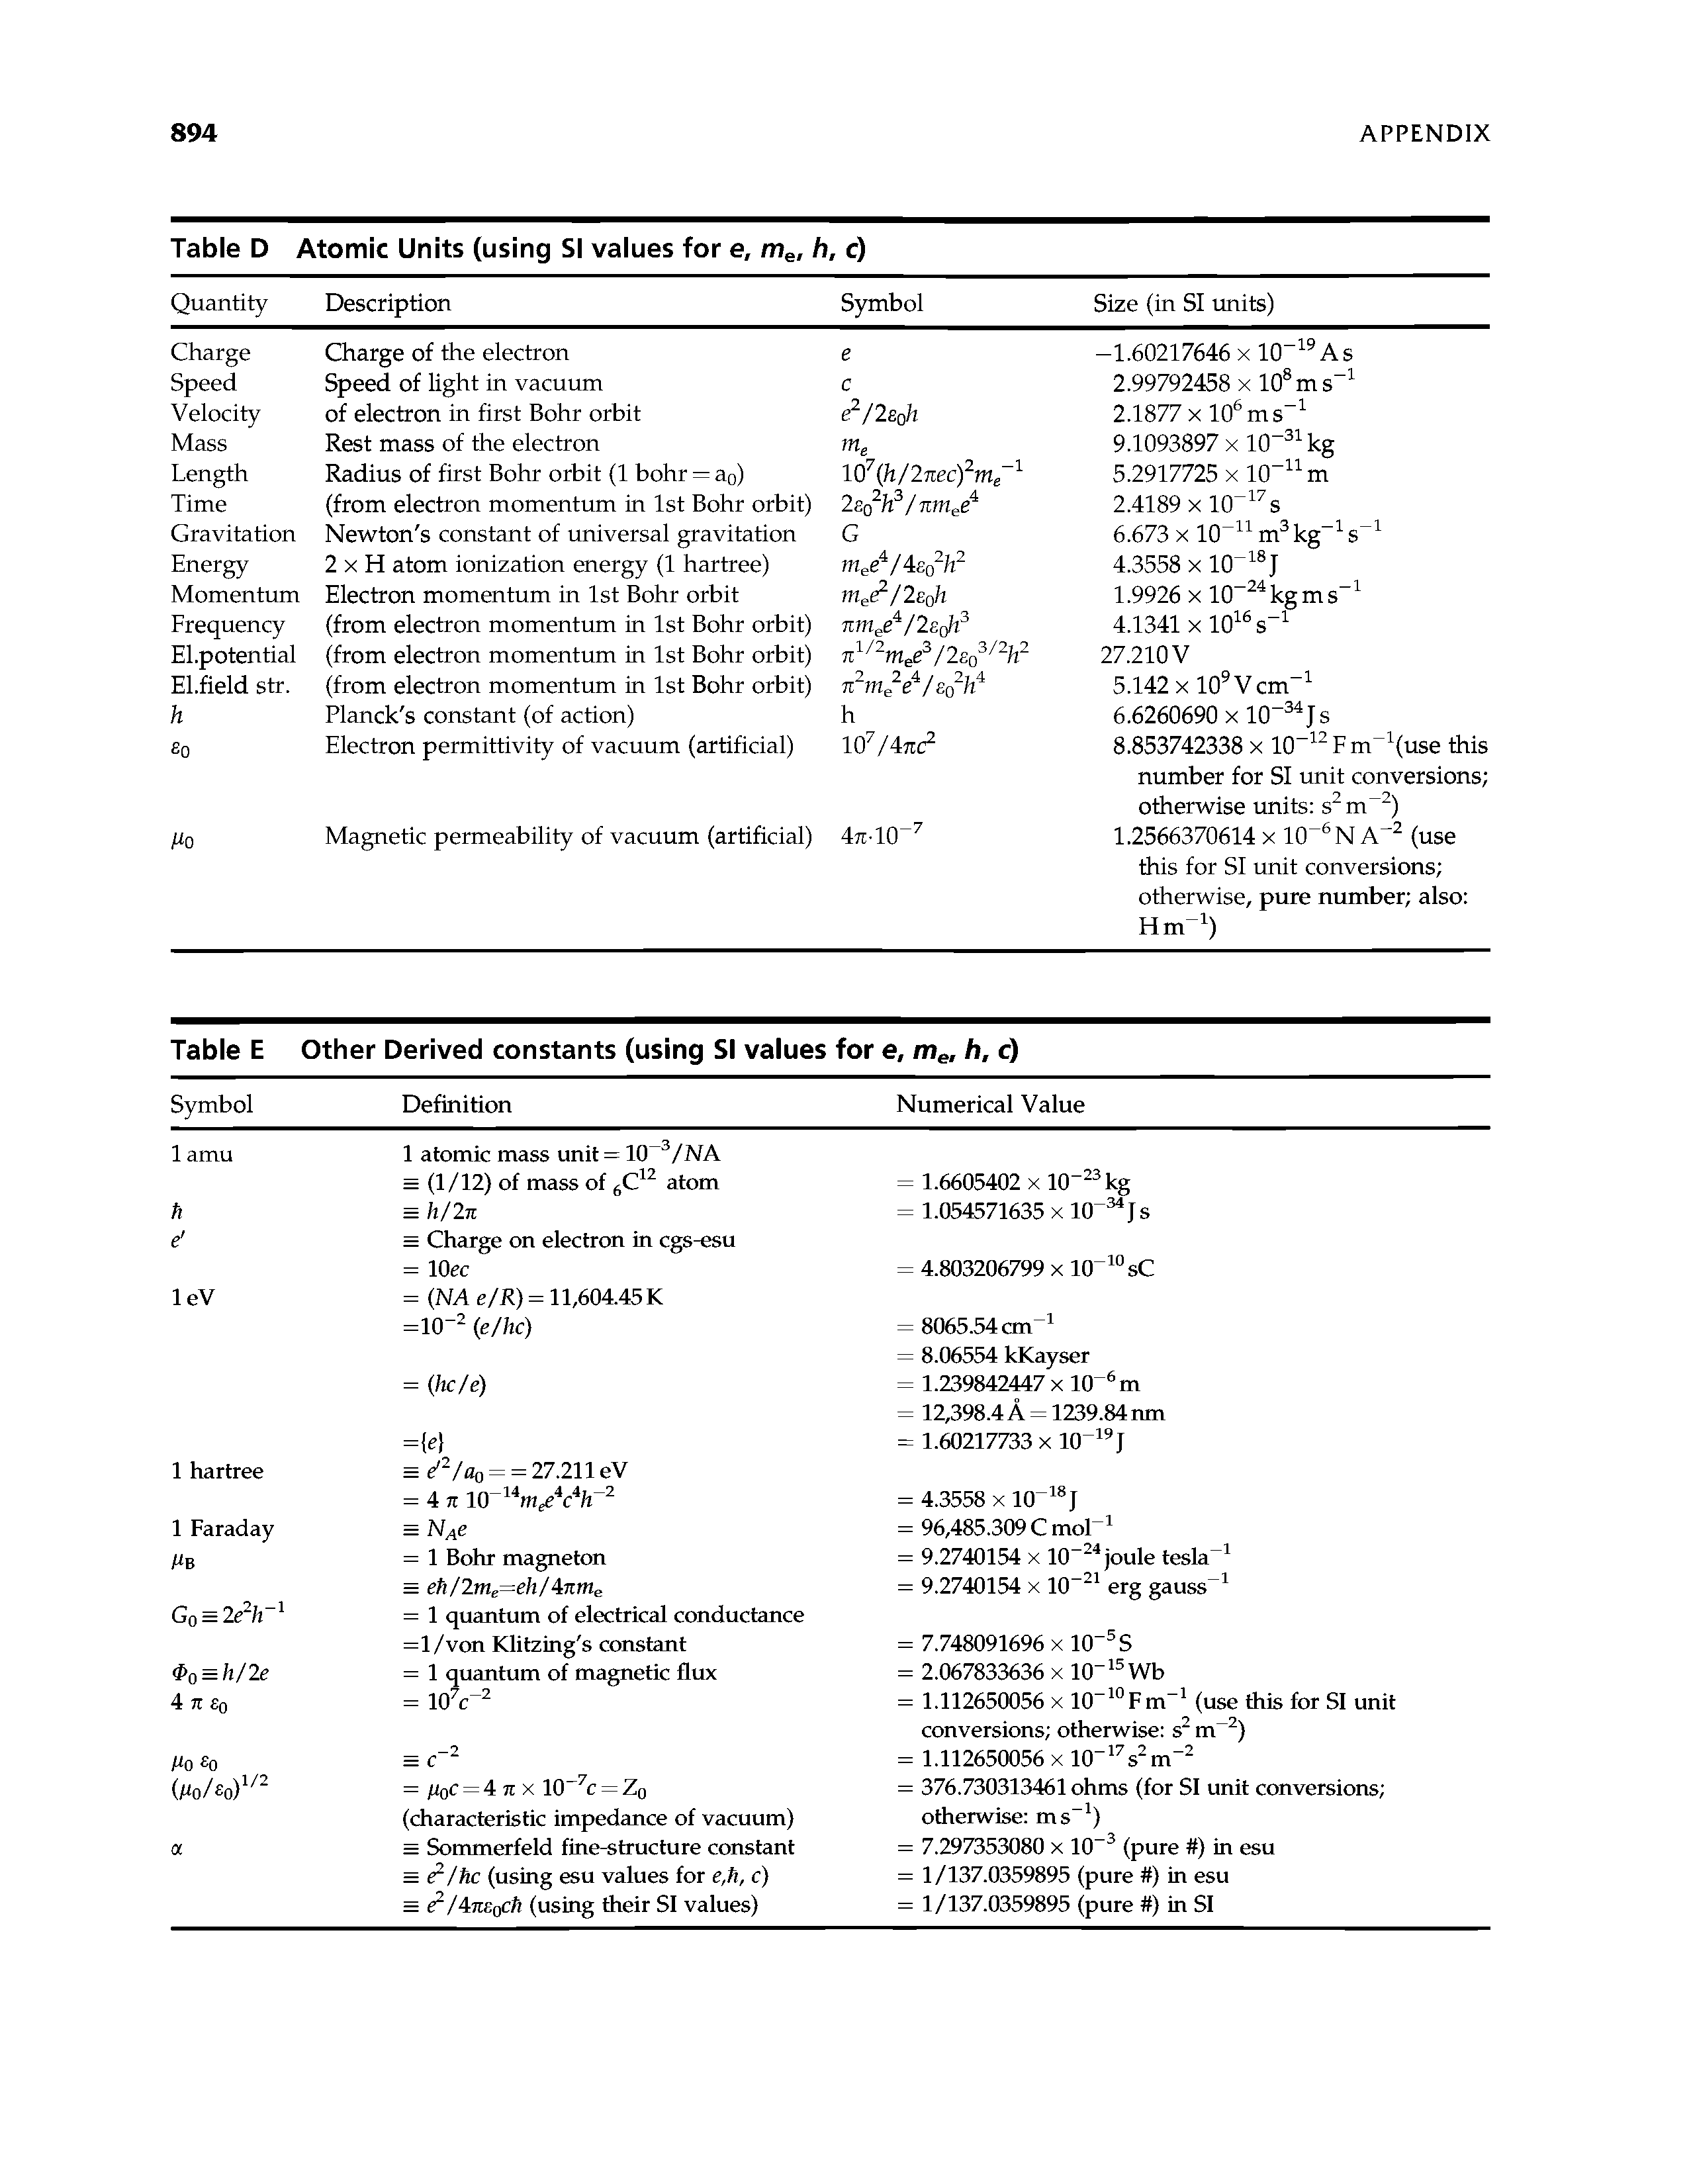 Table E Other Derived constants (using SI values for e, me, h, c) ...